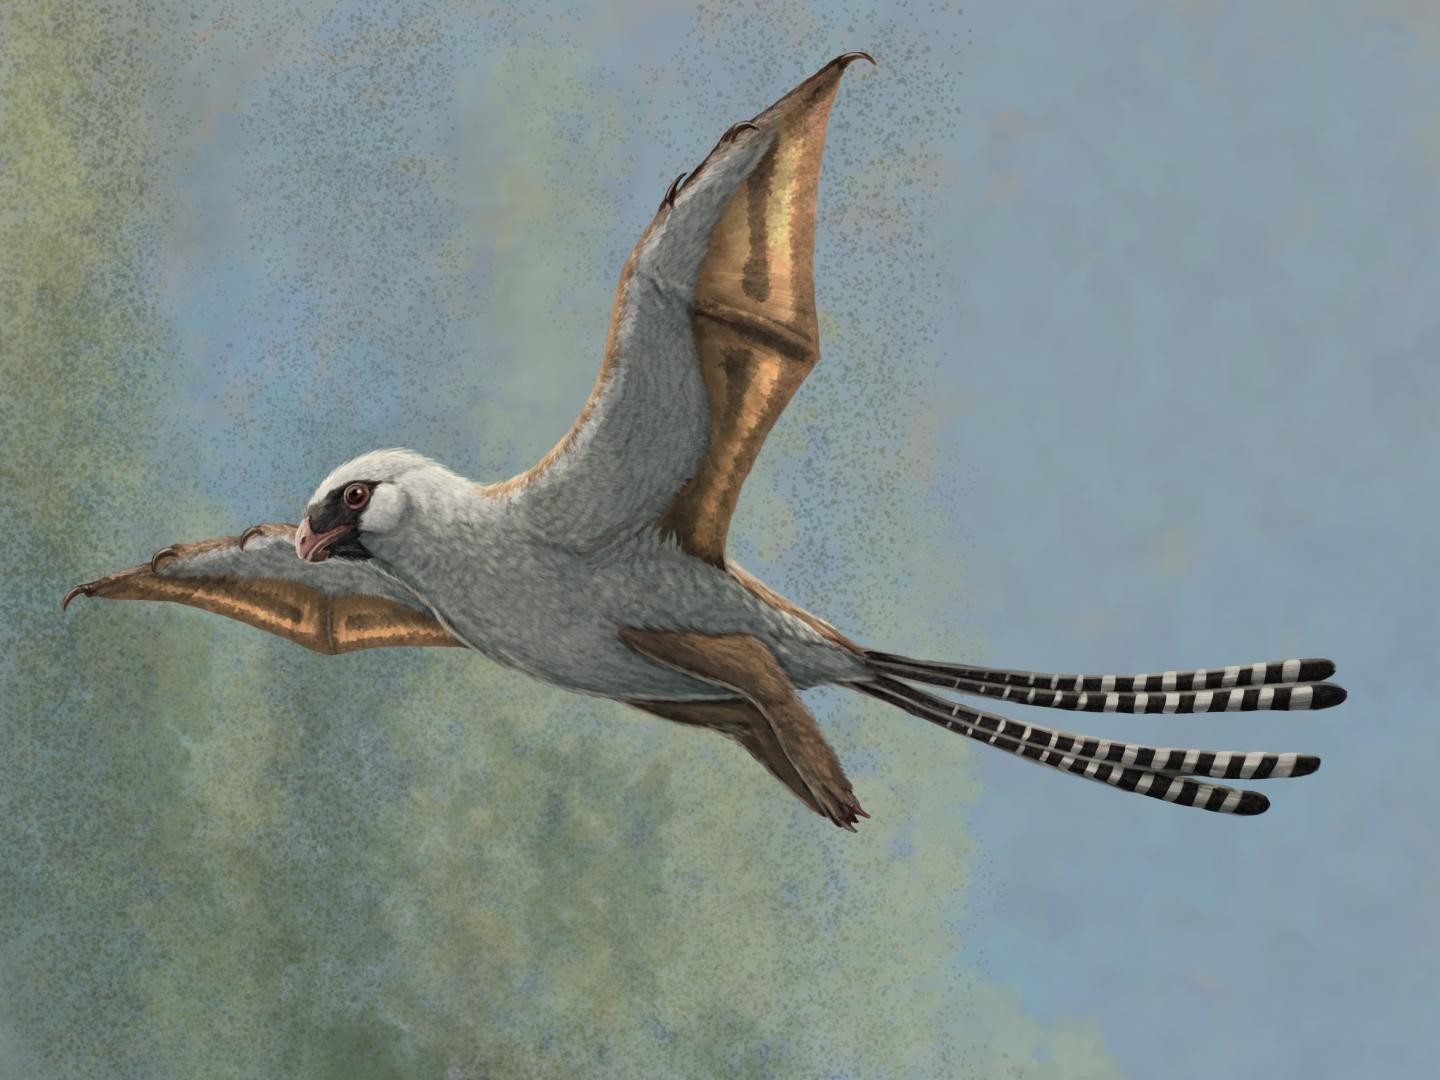 Dinosaurs may have evolved into birds, but early flights didn’t go so well